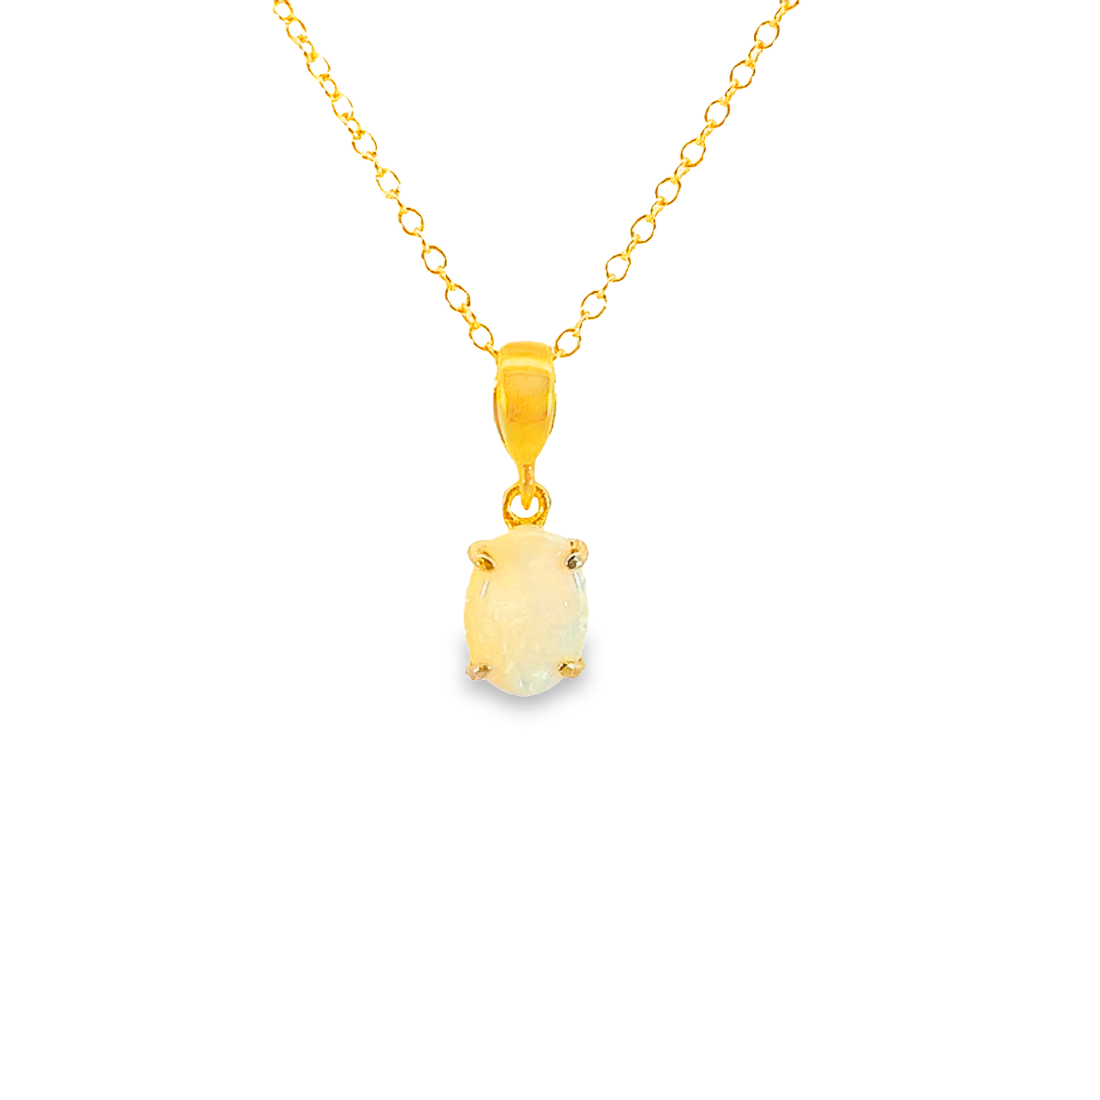 Gold Plated Sterling Silver 8x6mm White Opal solitaire pendant - Masterpiece Jewellery Opal & Gems Sydney Australia | Online Shop